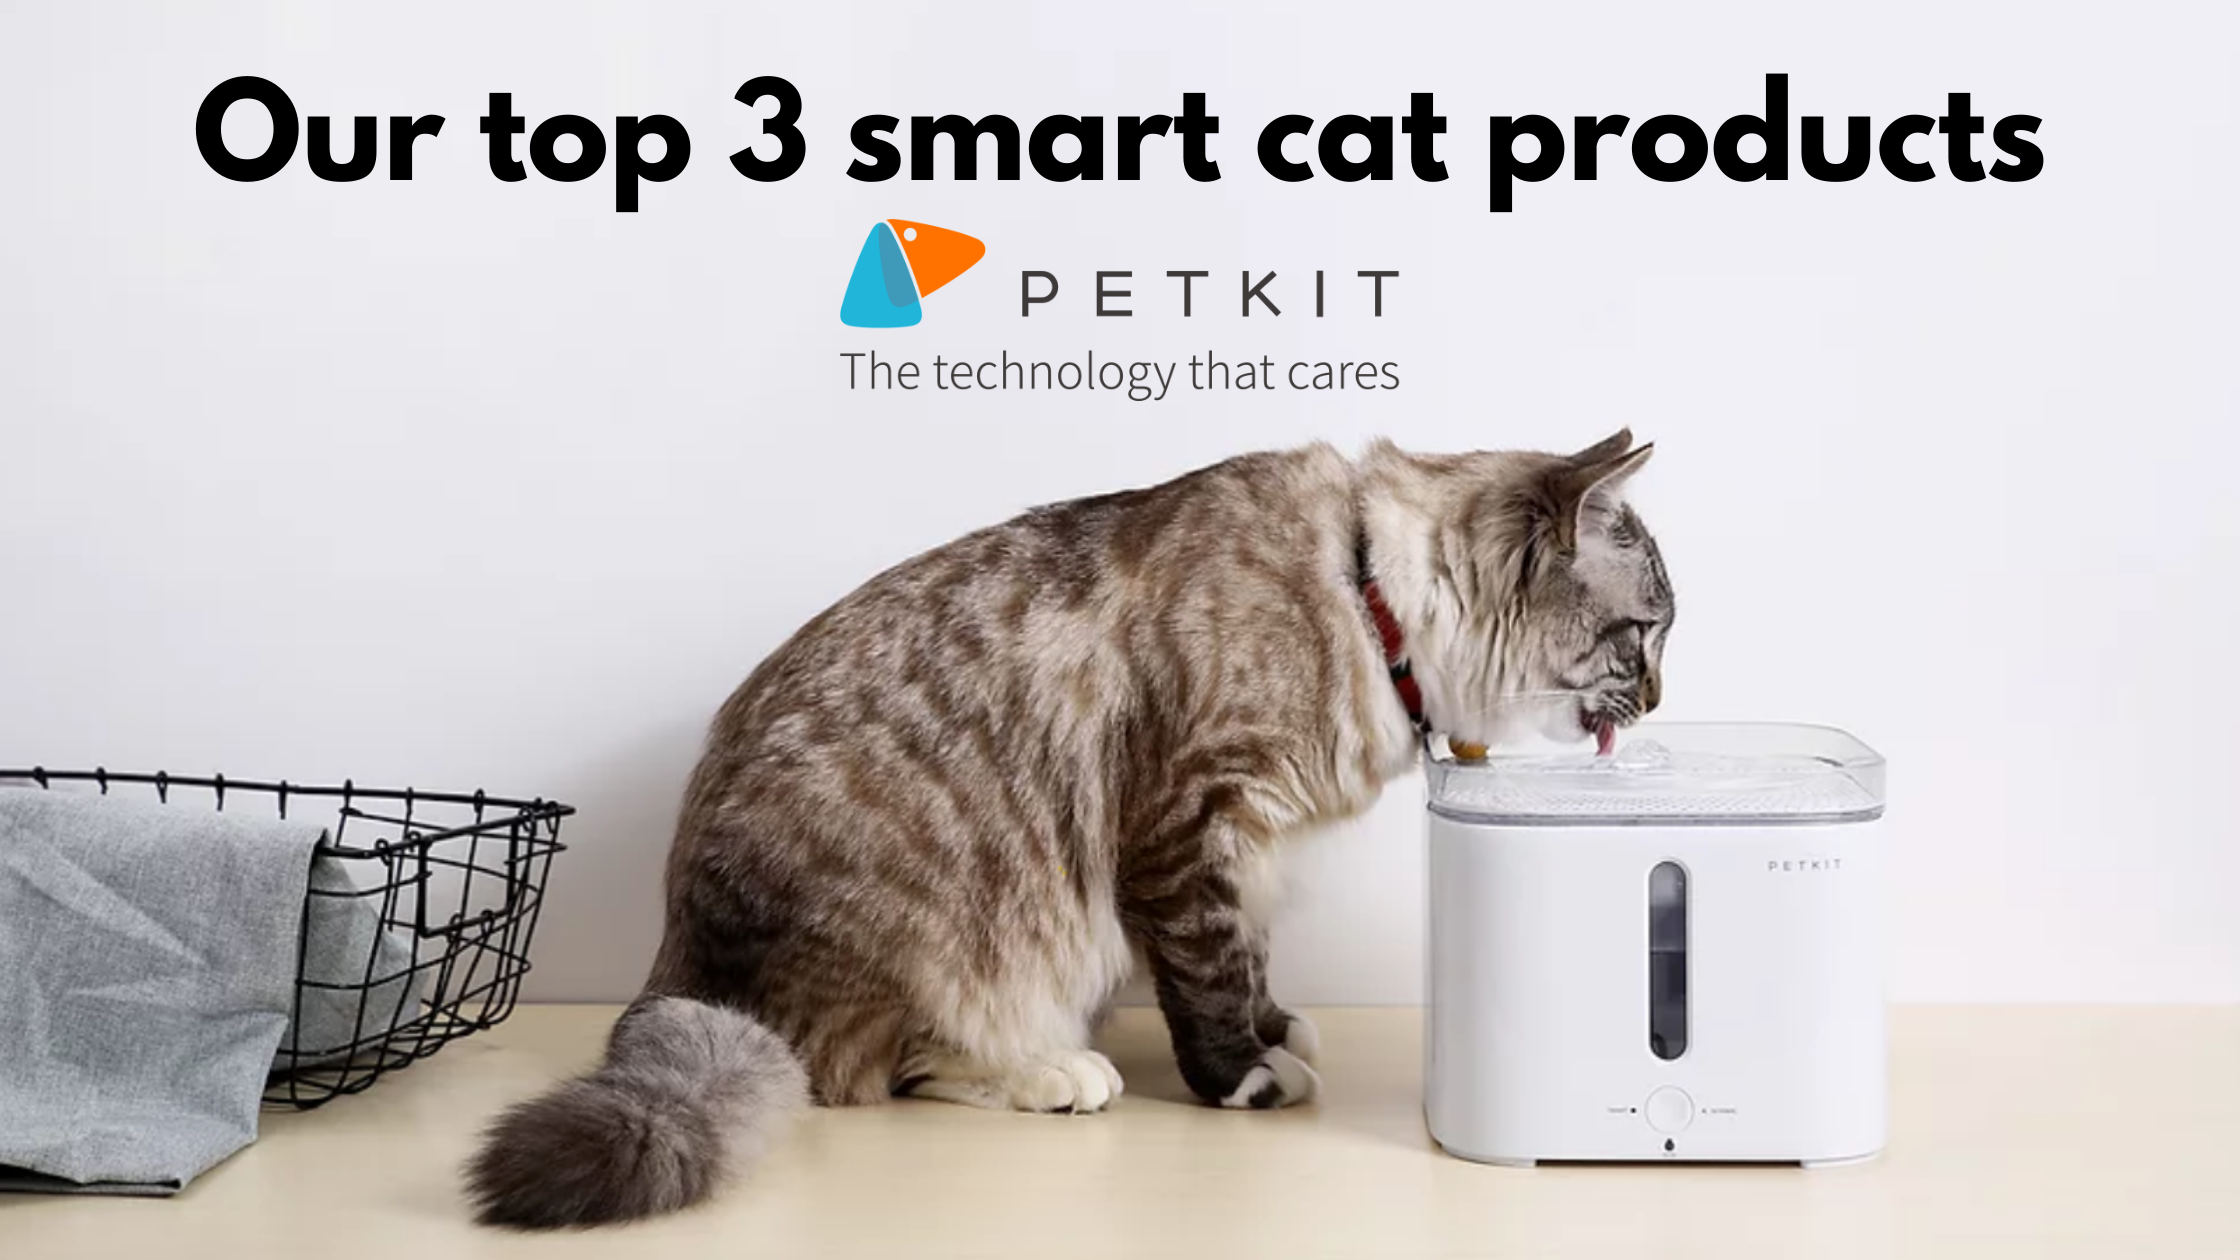 Our top 3 smart cat products by Petkit